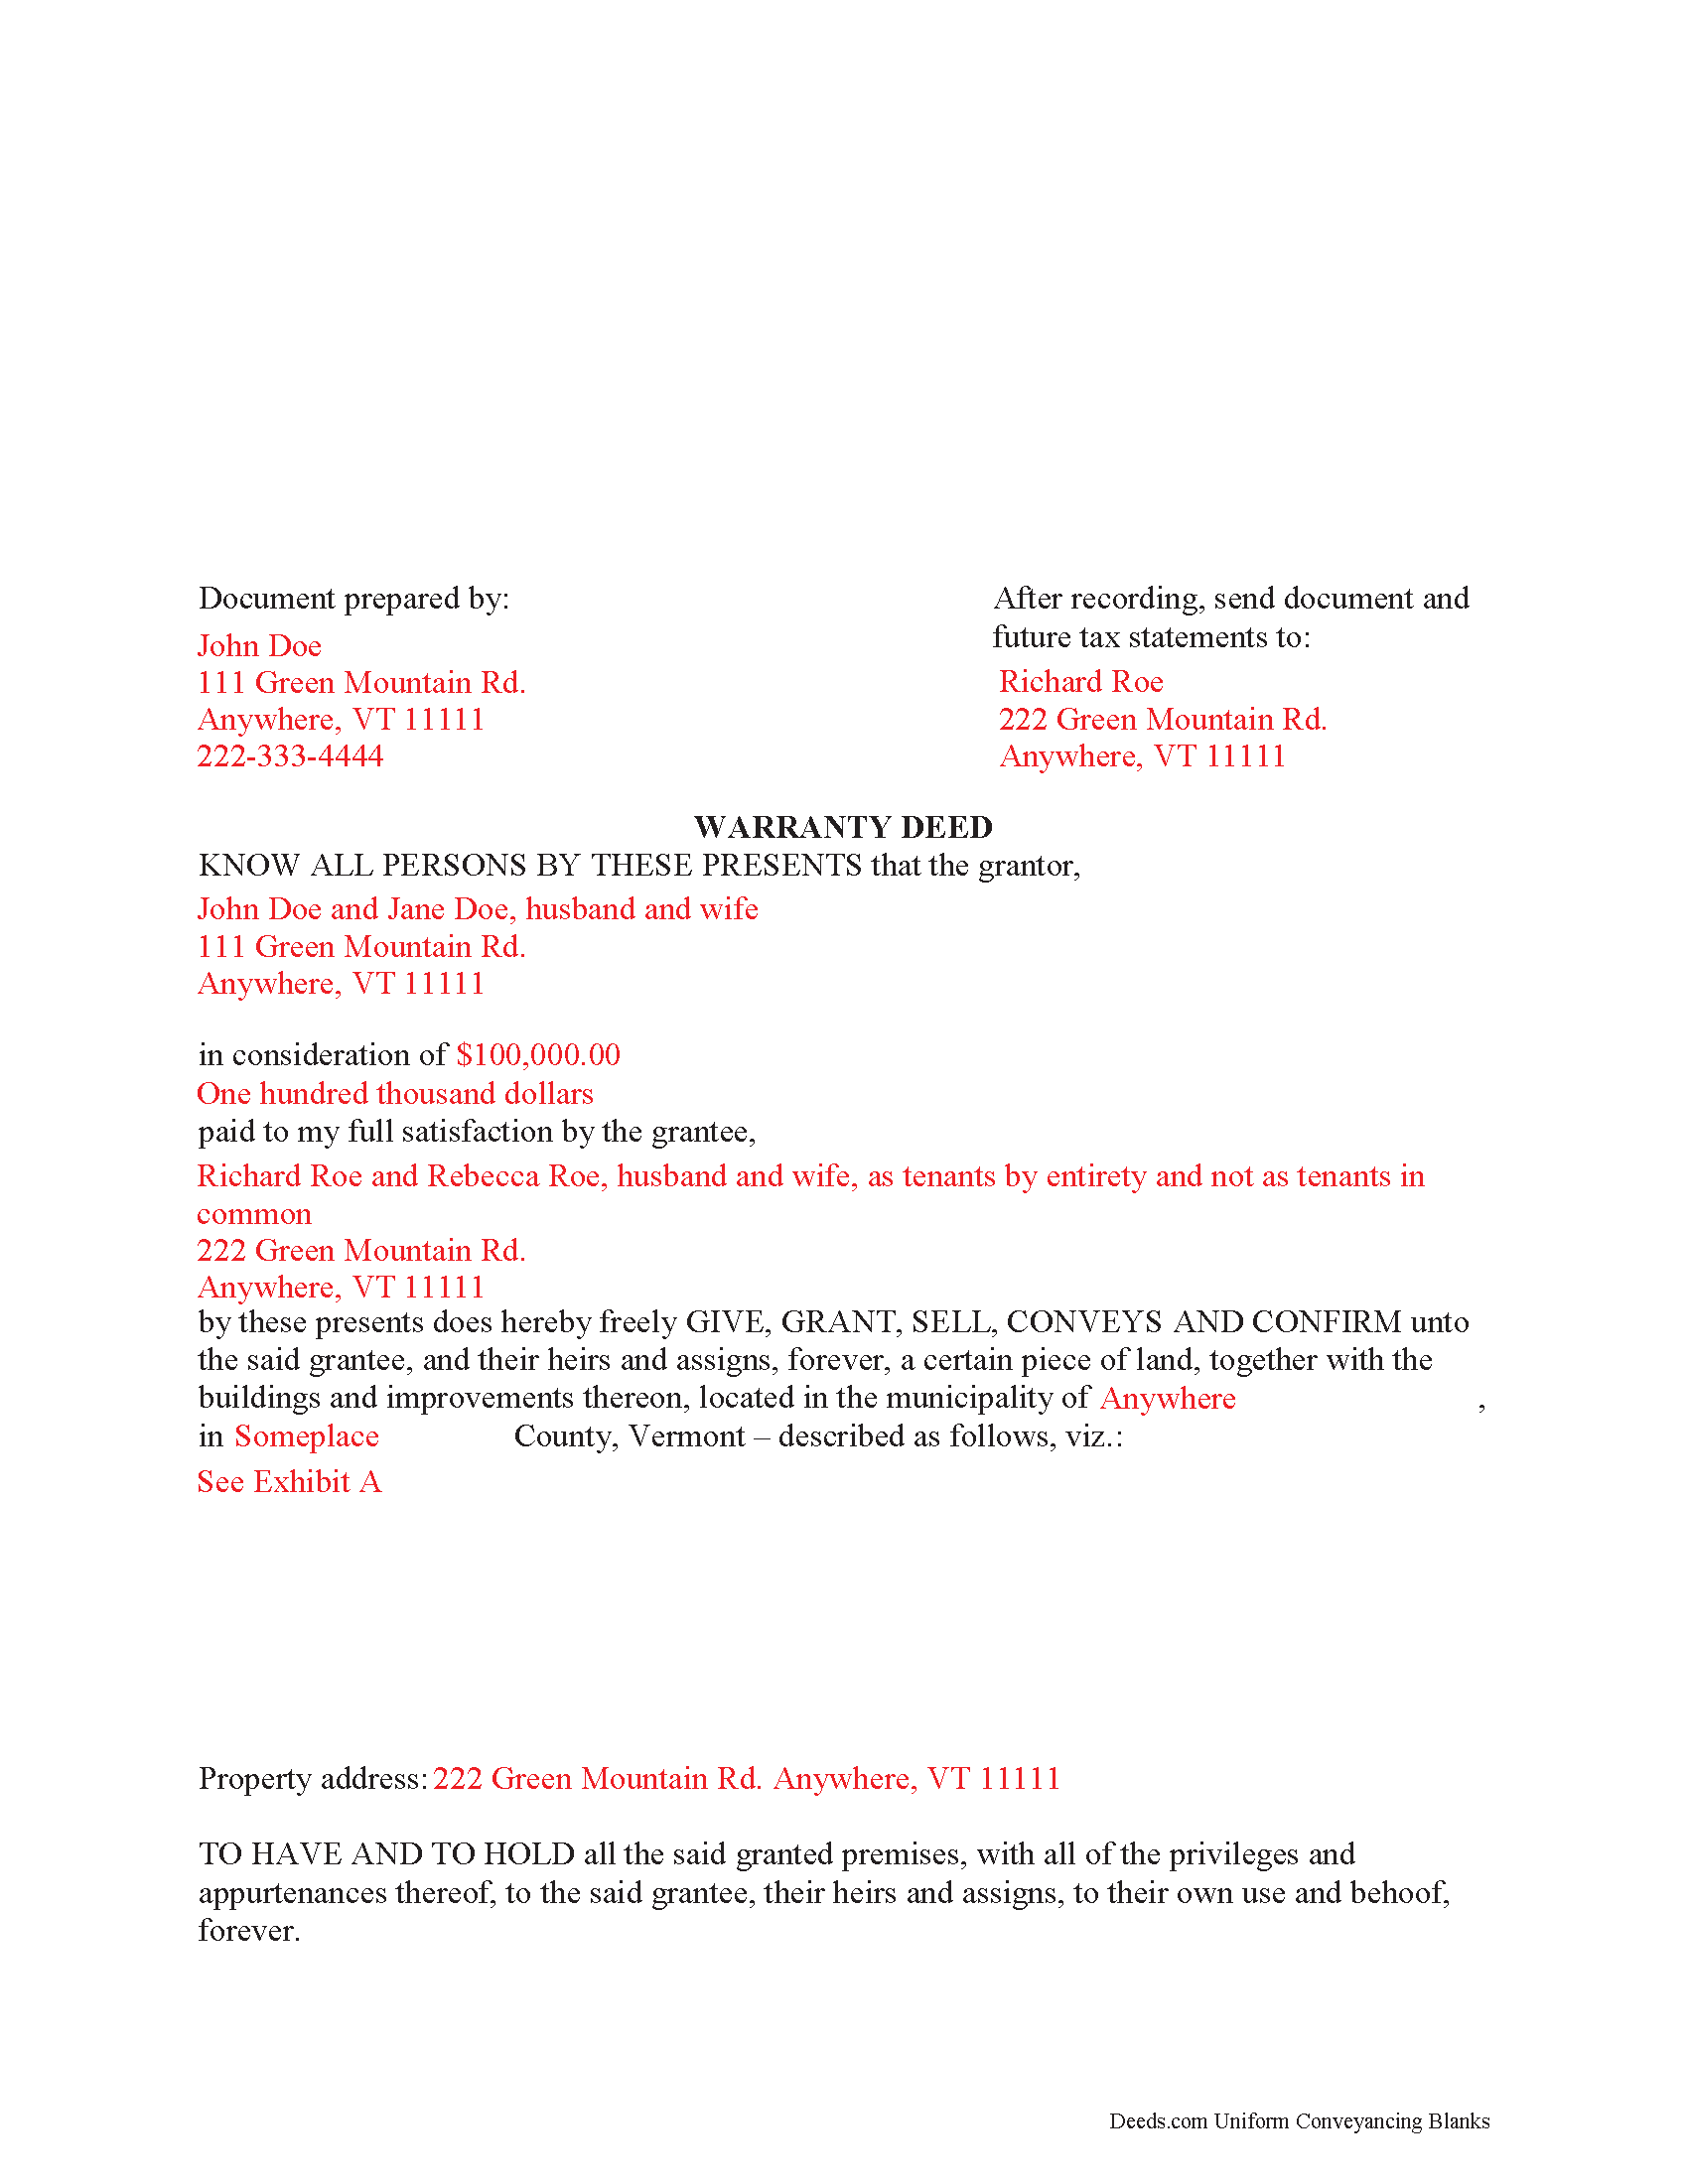 Completed Example of the Warranty Deed Document